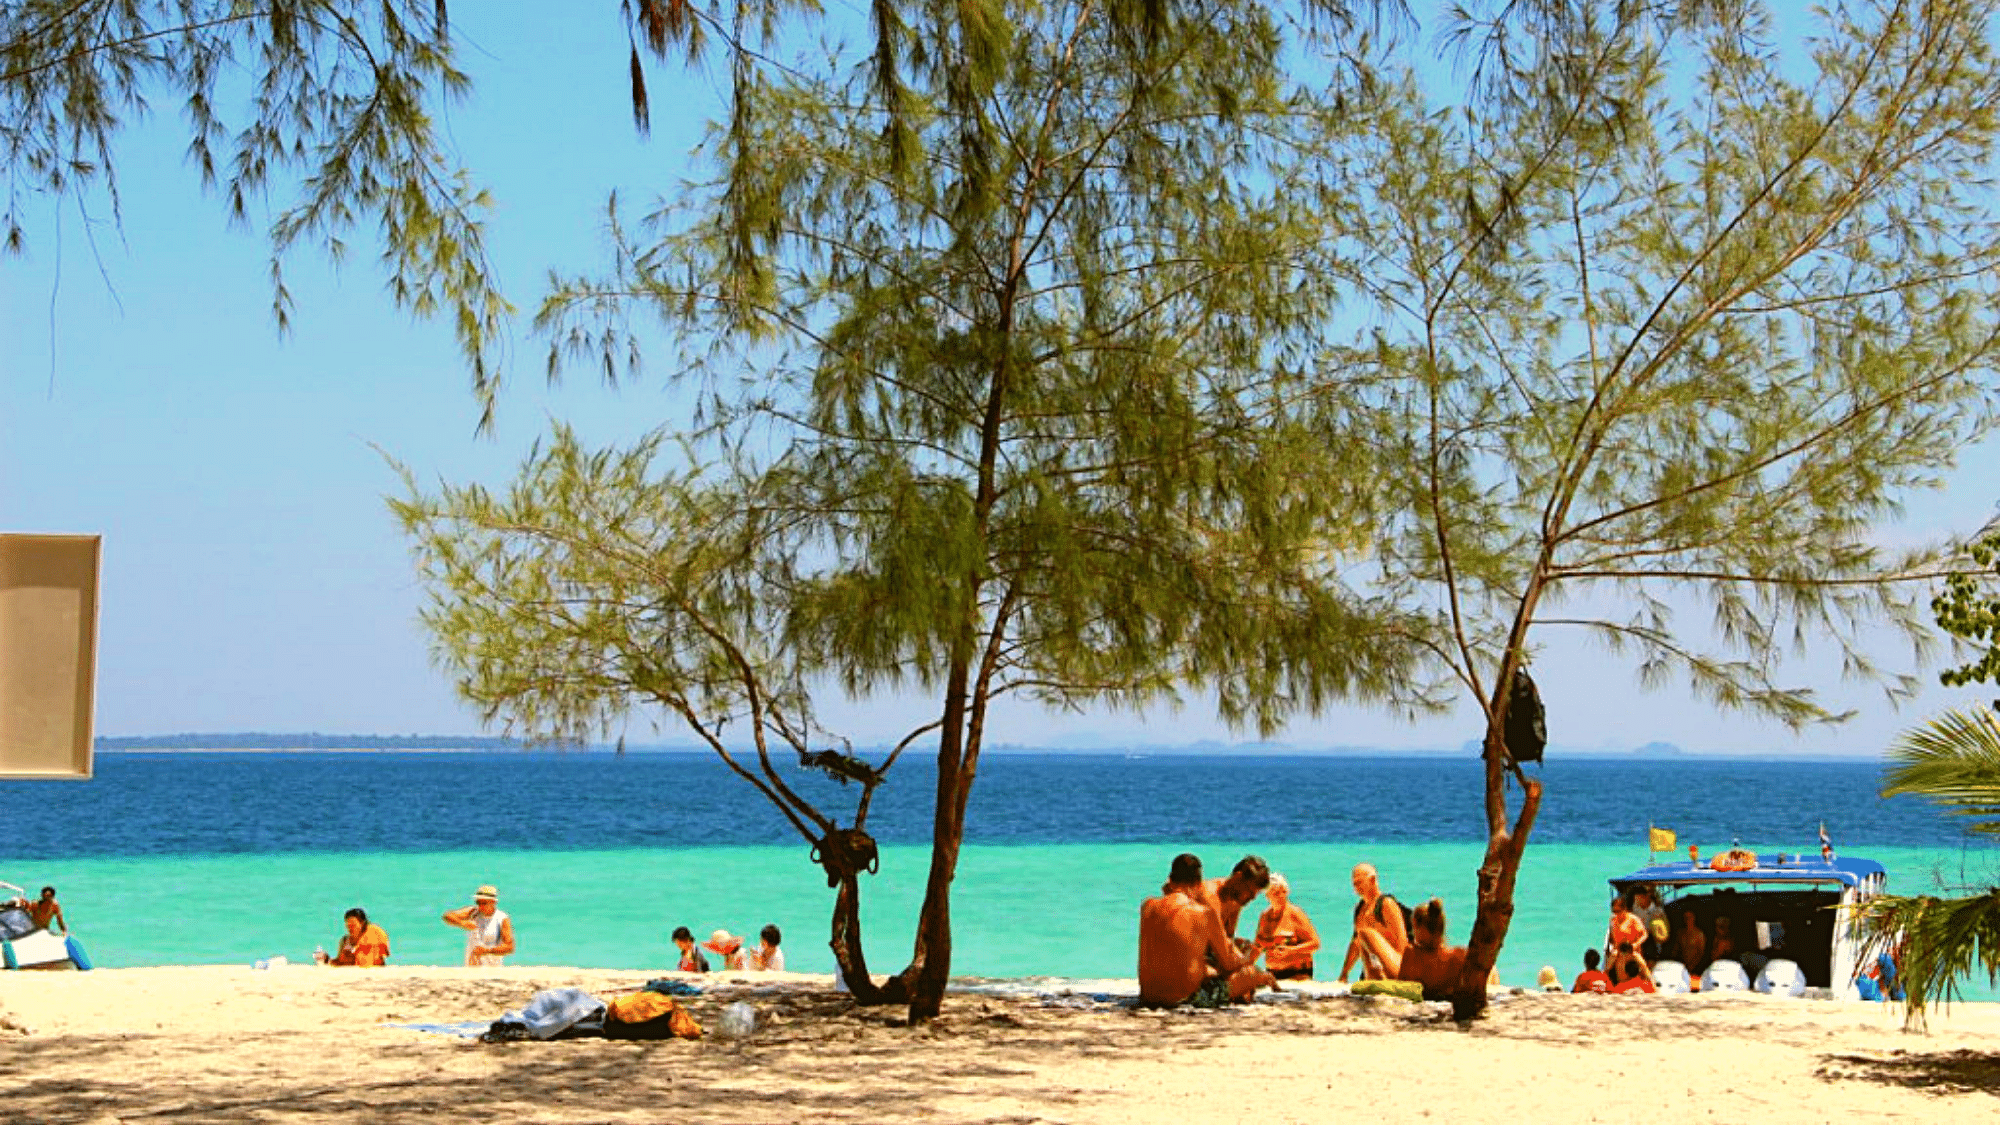 Krabi actually does have ‘powder white sands’ and ‘pristine beaches’!